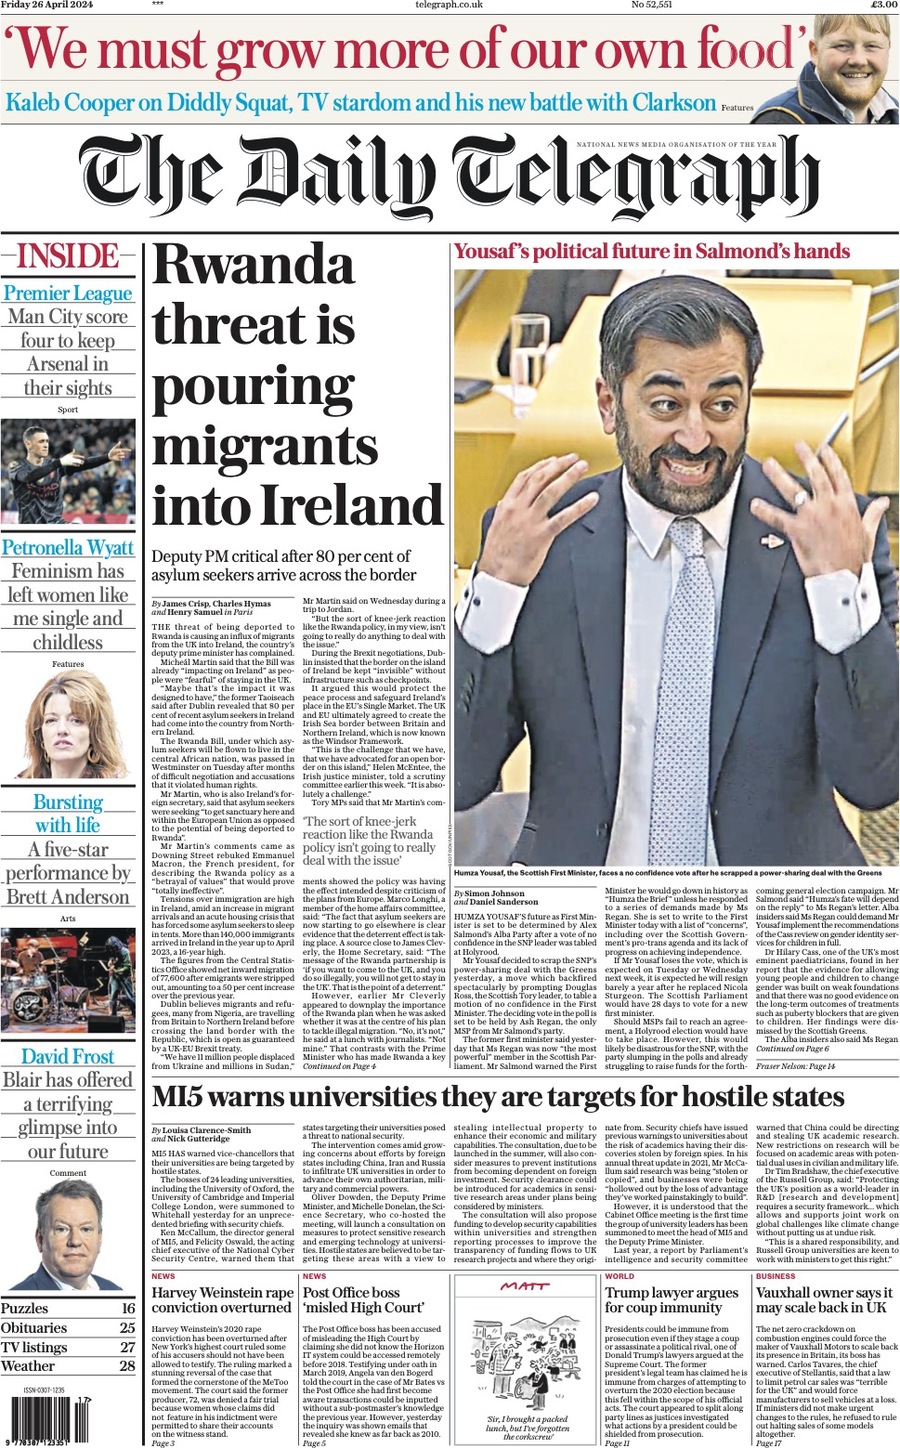 The Daily Telegraph - Front Page - 04/26/2024